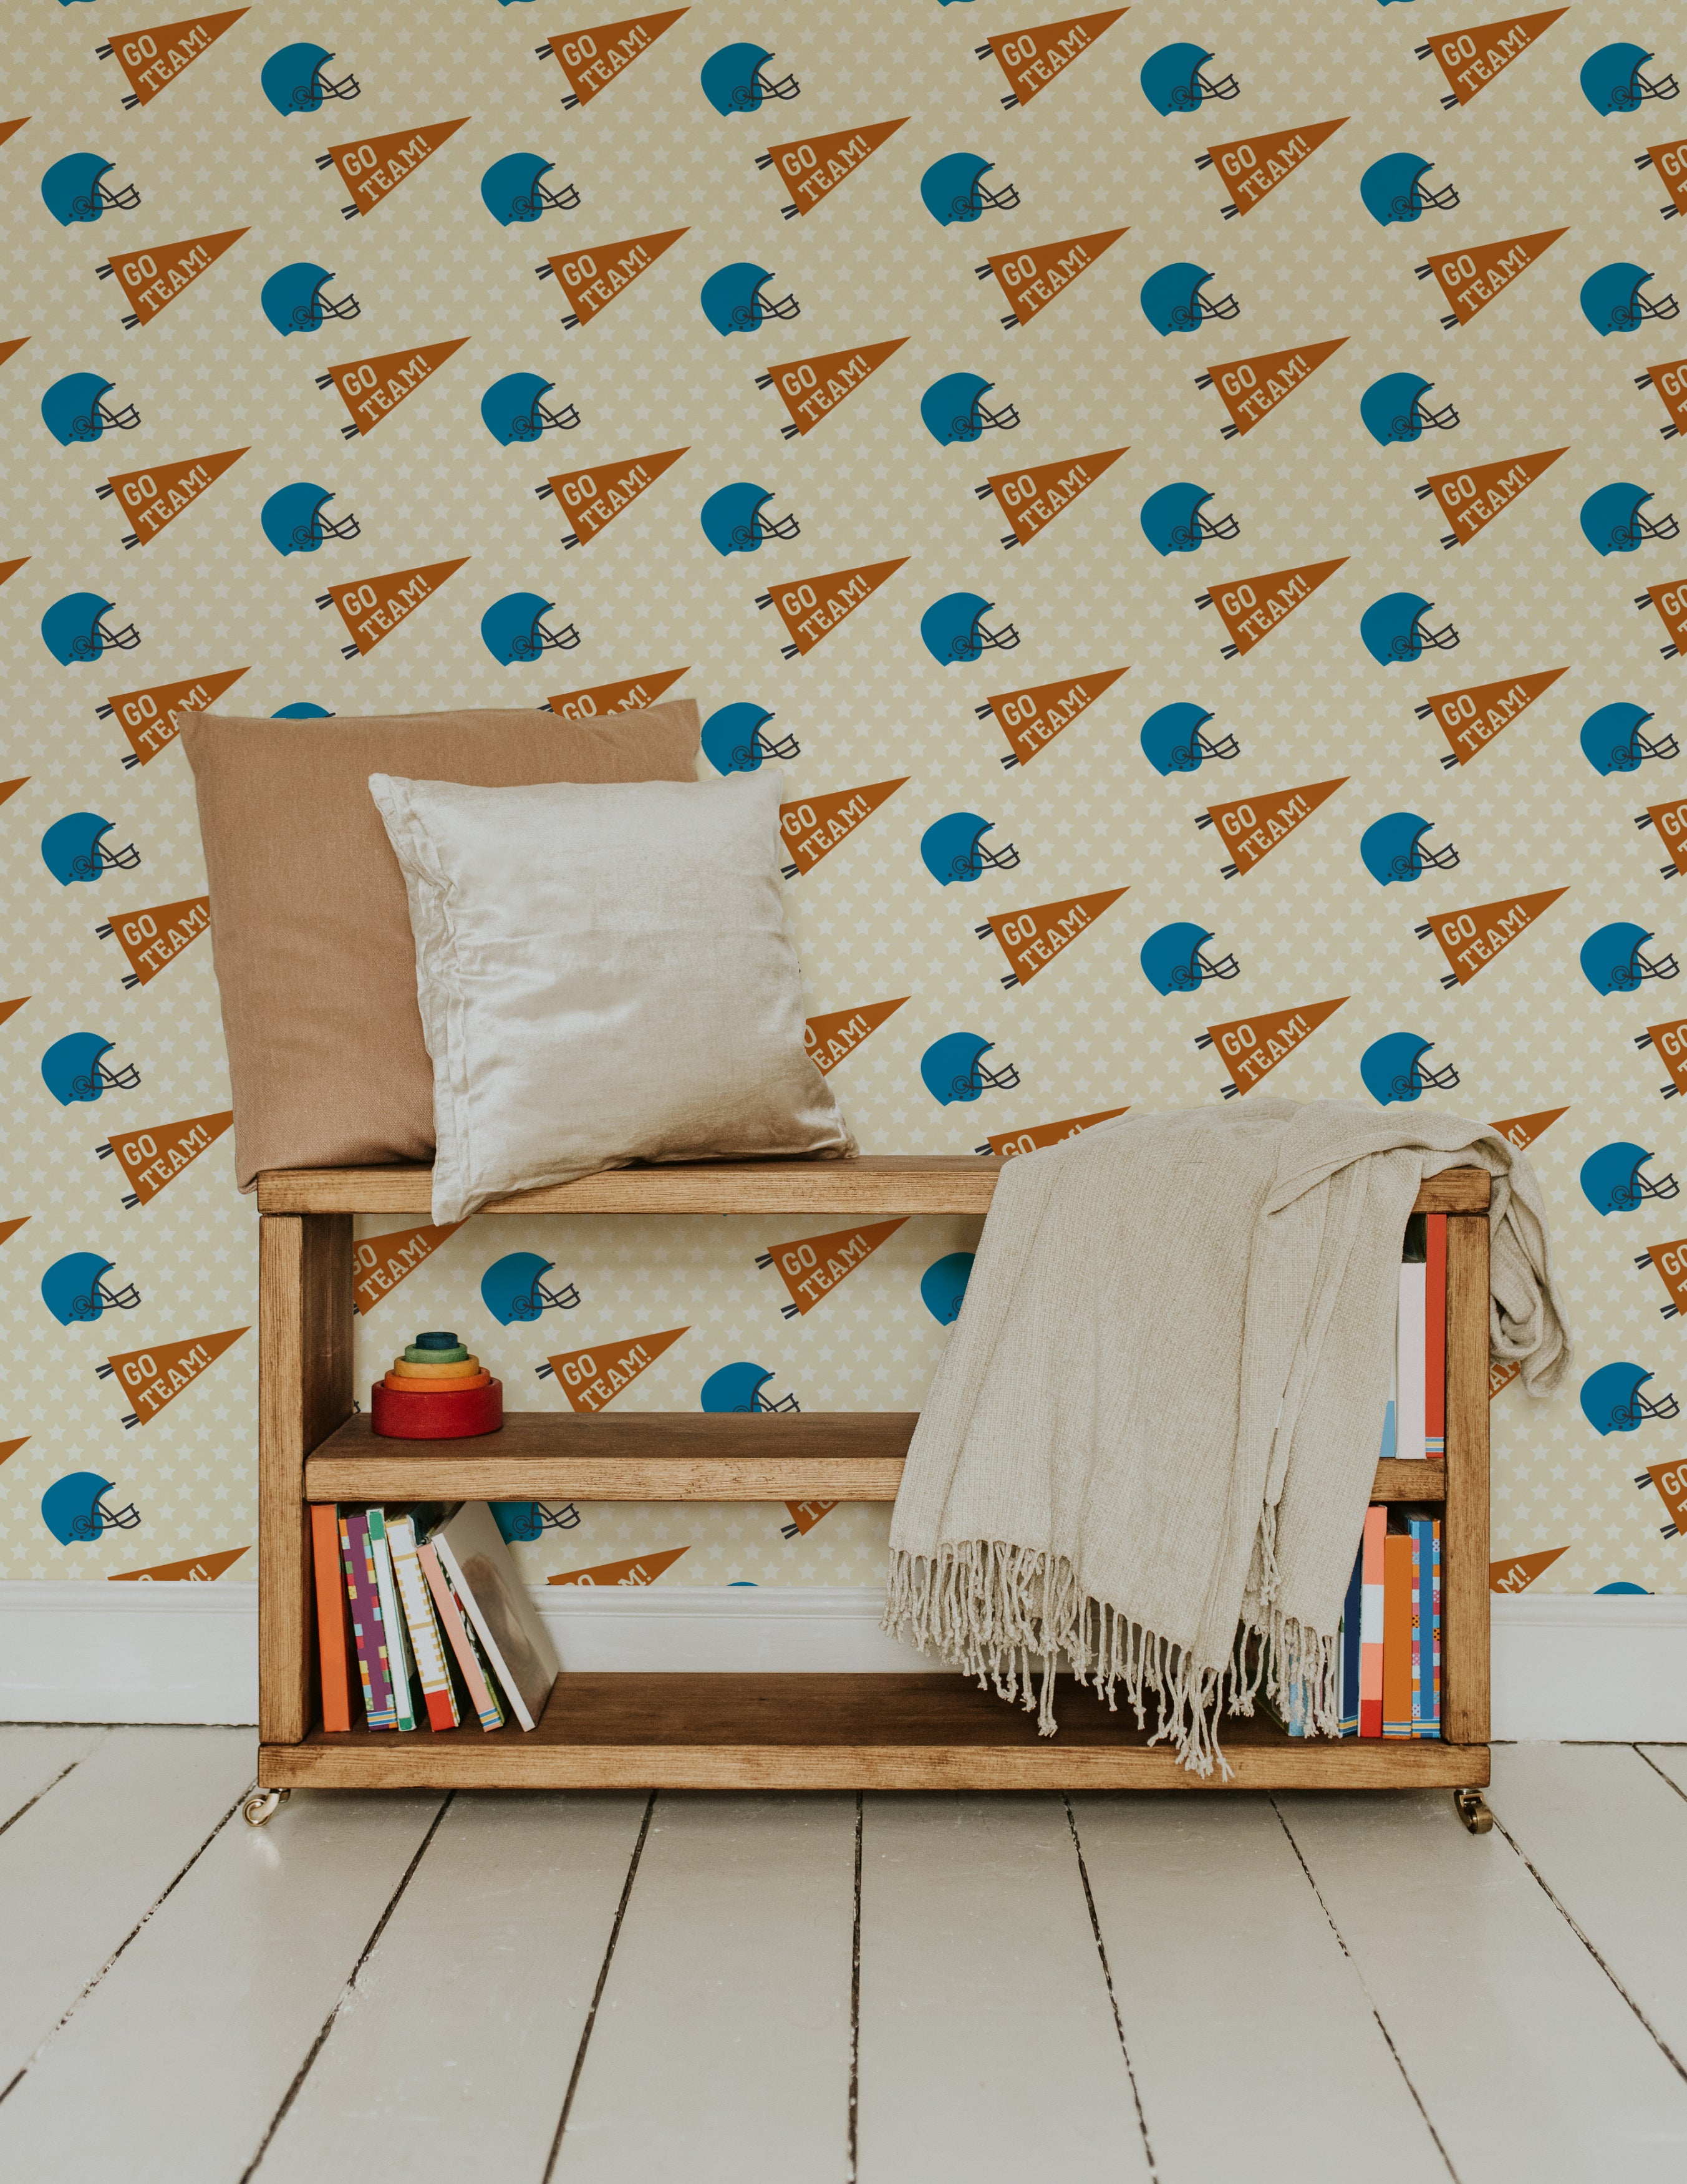 A cozy reading nook with a wooden bookshelf and cushions, decorated with Game Day wallpaper. The wallpaper features blue football helmets and orange 'Go Team!' pennants on a beige star-studded background.